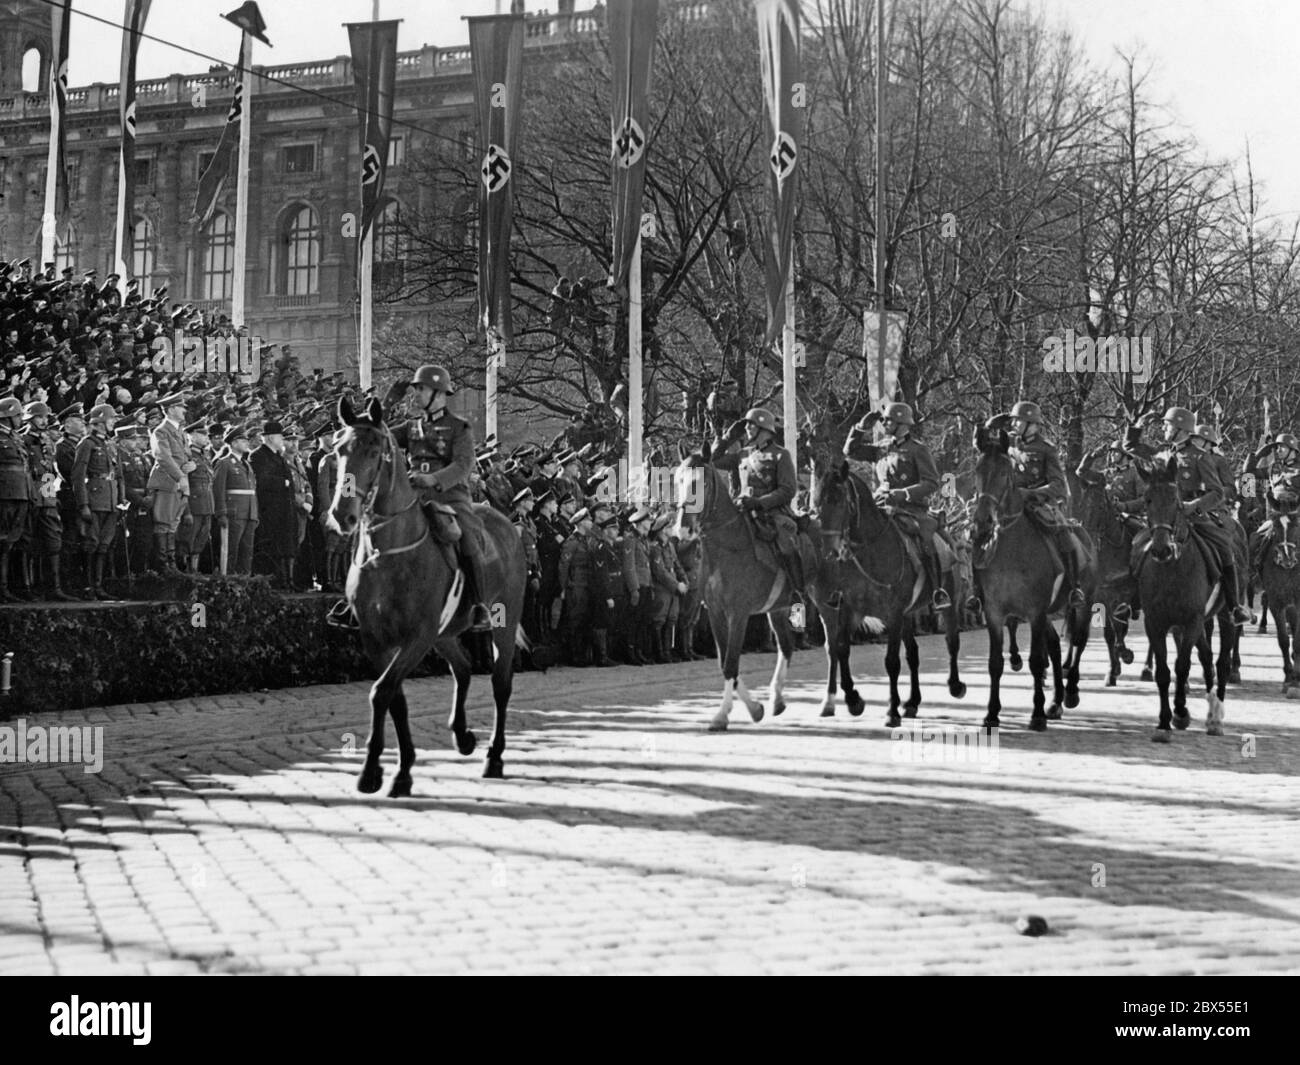 Officers of the officer corps salute on horseback the National Socialist leader Adolf Hitler on the Heldenplatz in Vienna. There he announces the annexation of Austria to the German Reich. Next to Hitler (left) are Generals Fedor von Bock and Alfred Krauss (in civilian clothes) and Reichsfuehrer SS Heinrich Himmler. Stock Photo